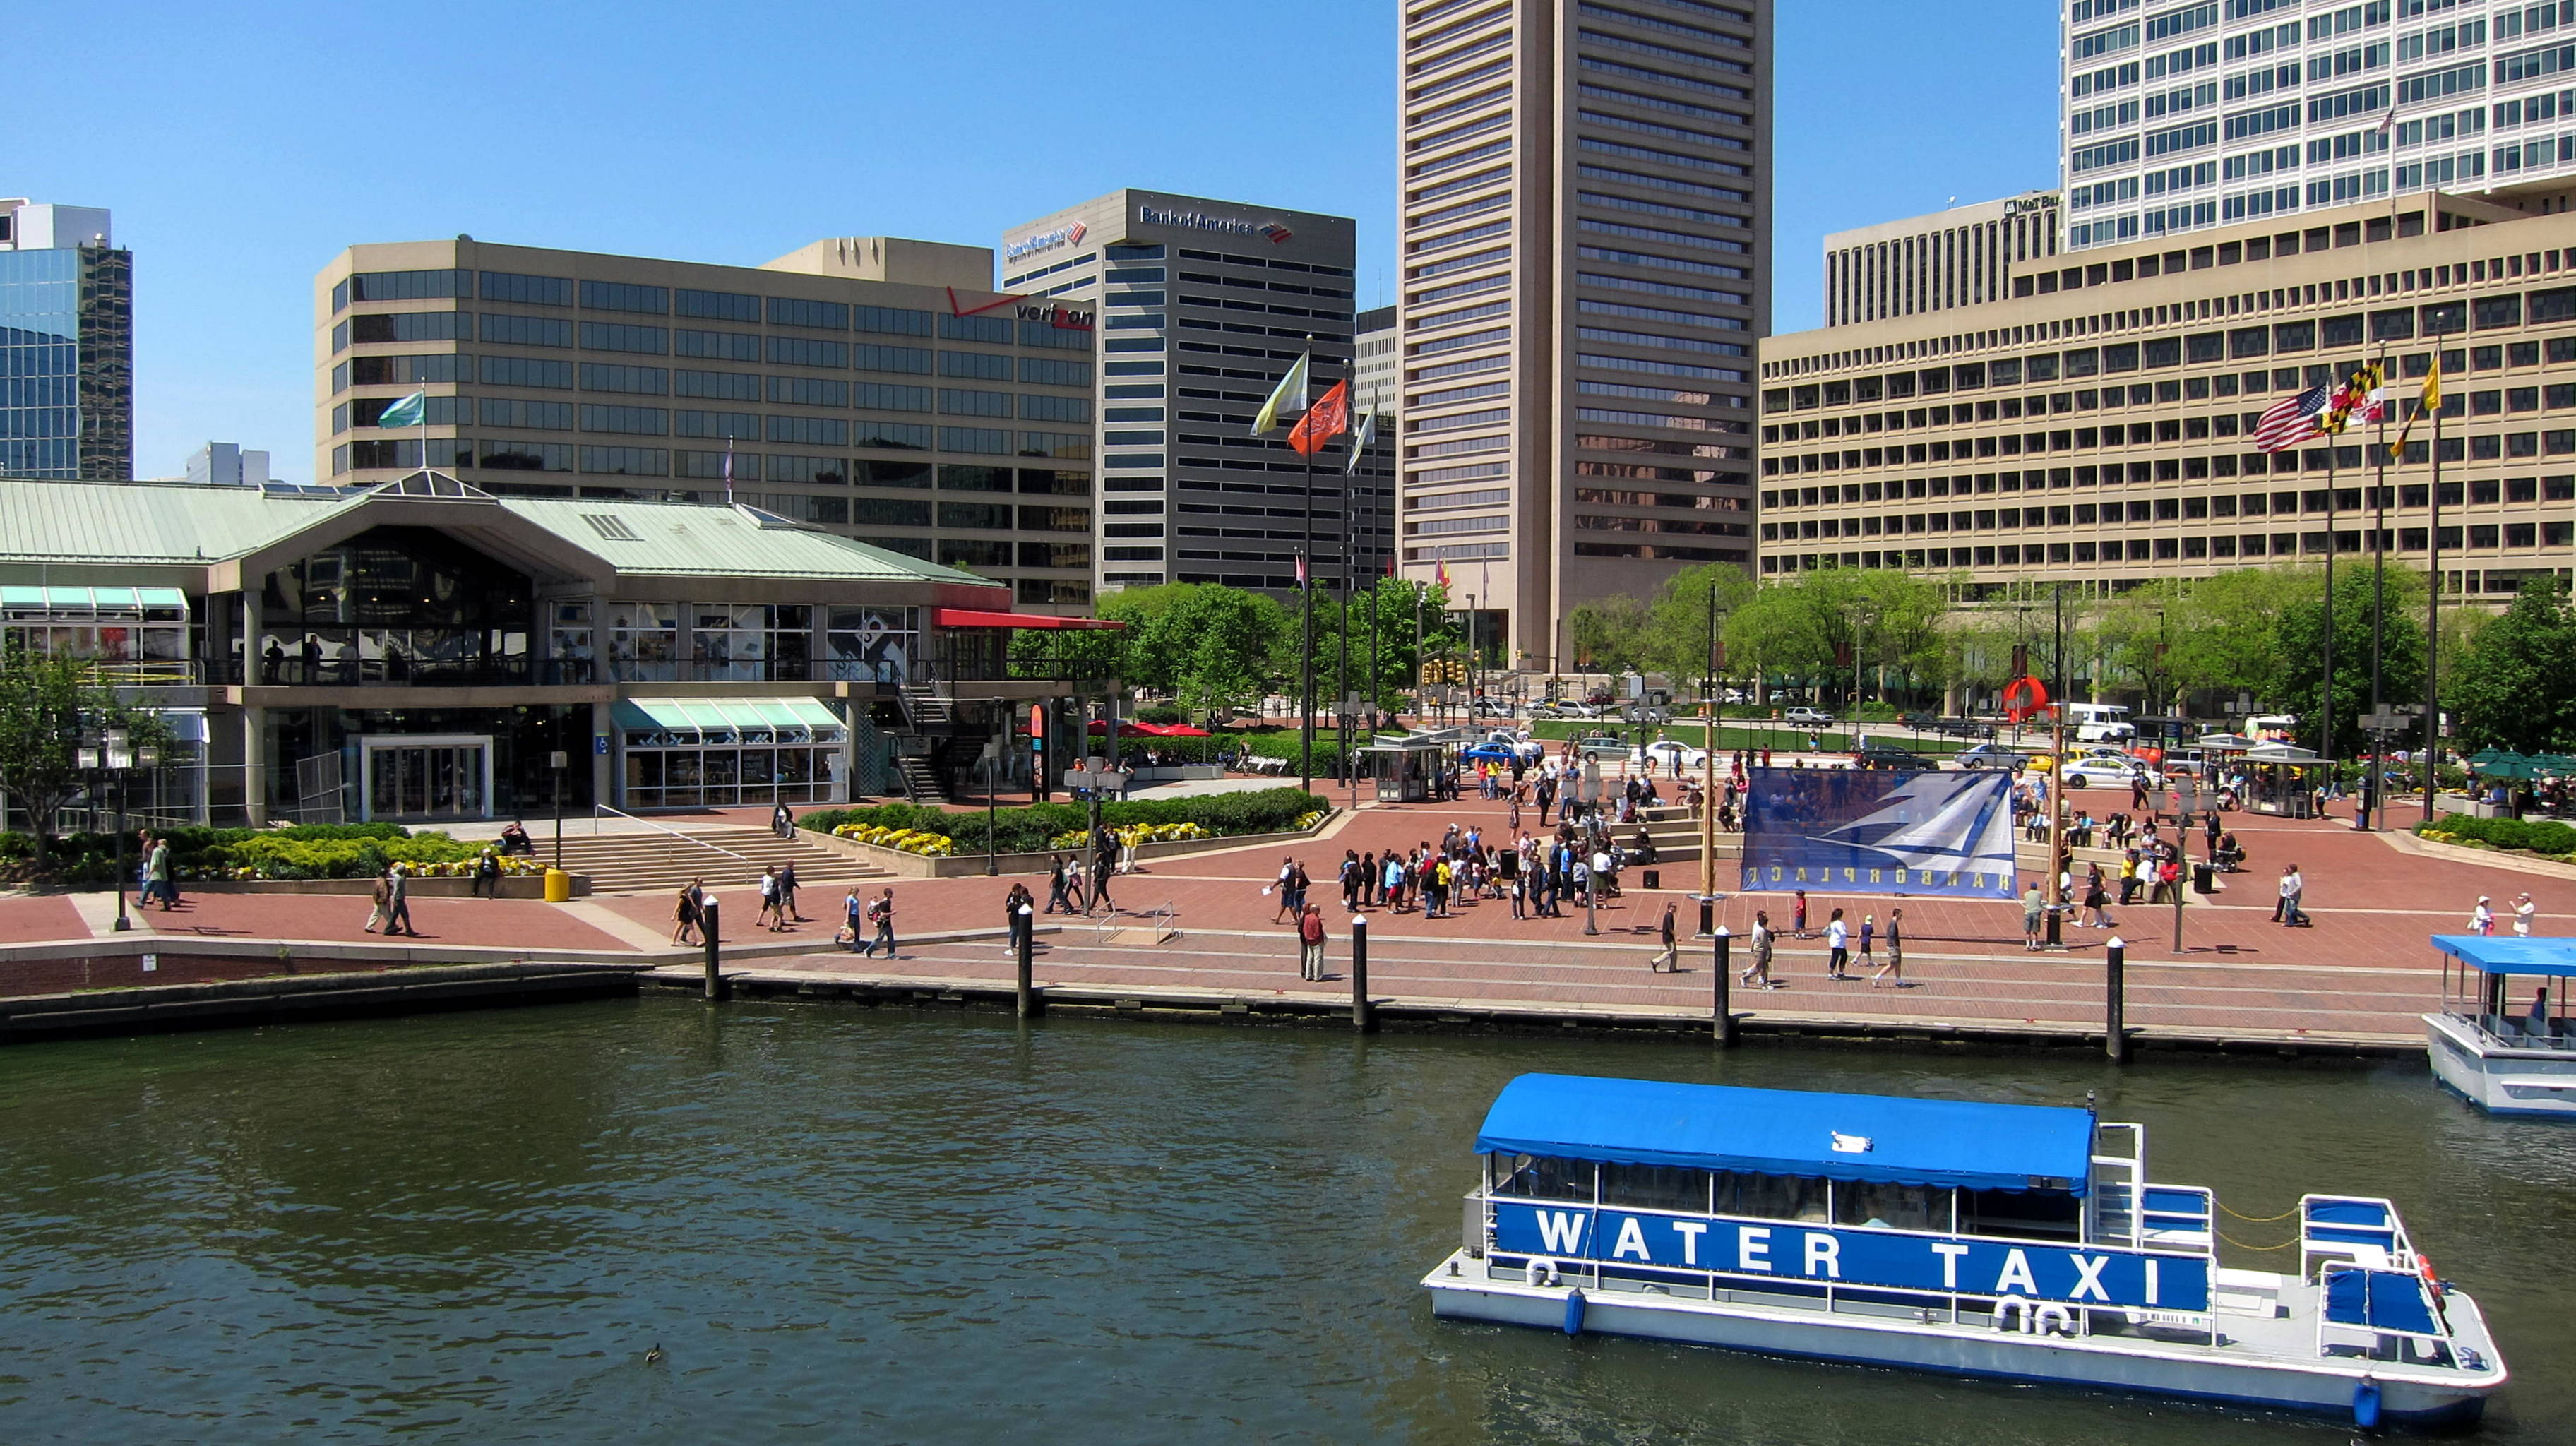 Reimagining Harborplace, and other city development projects